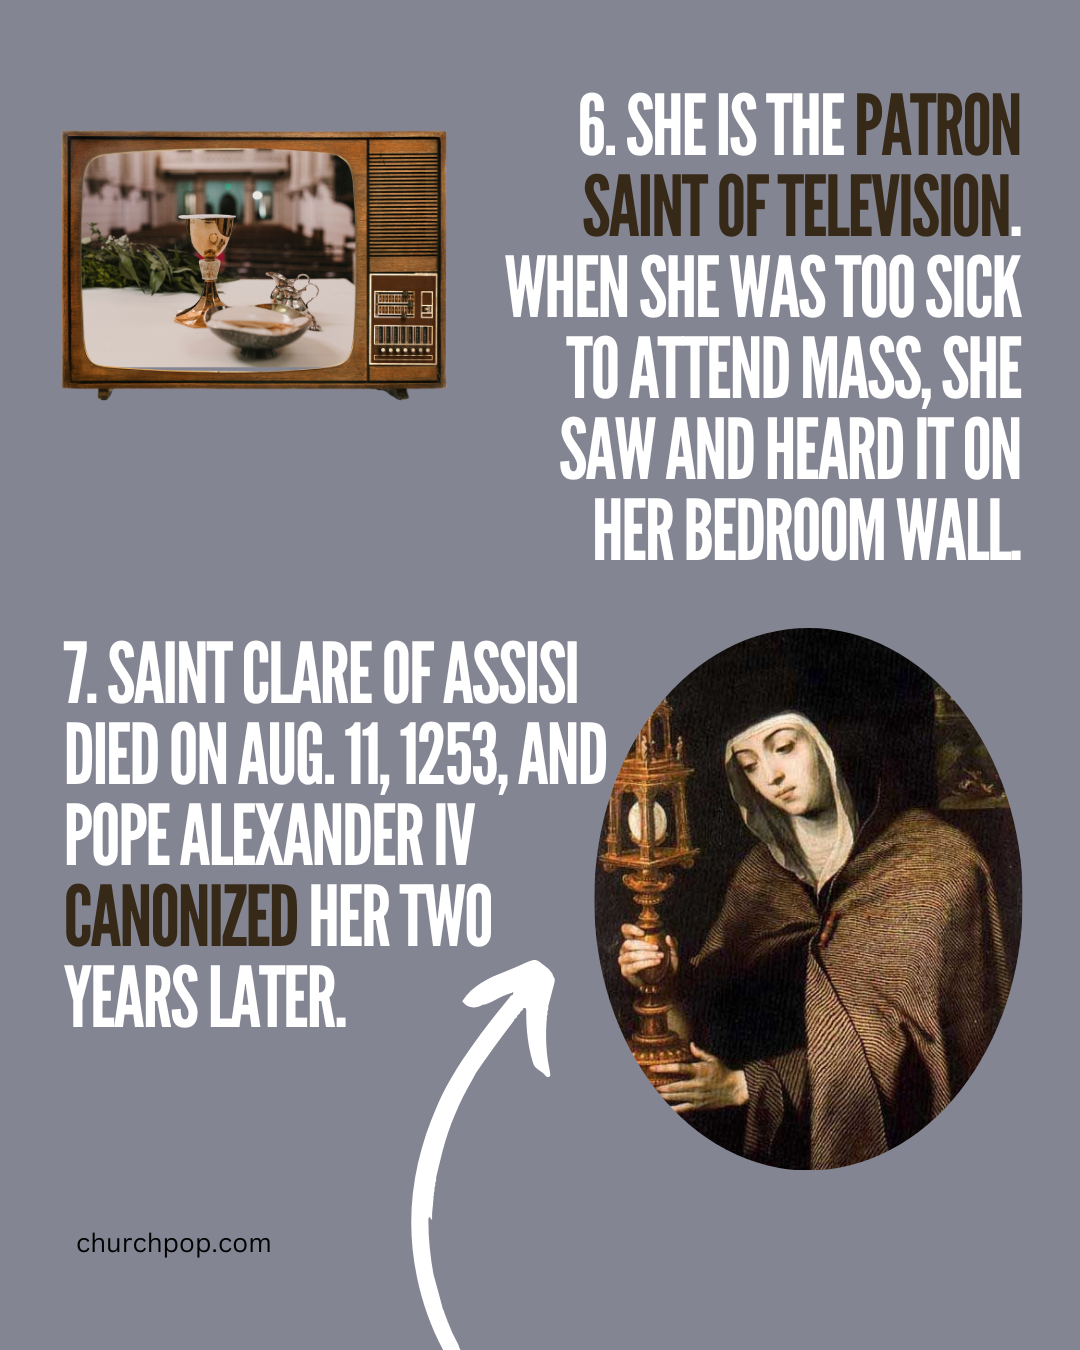 Why was St. Clare of Assisi canonized?